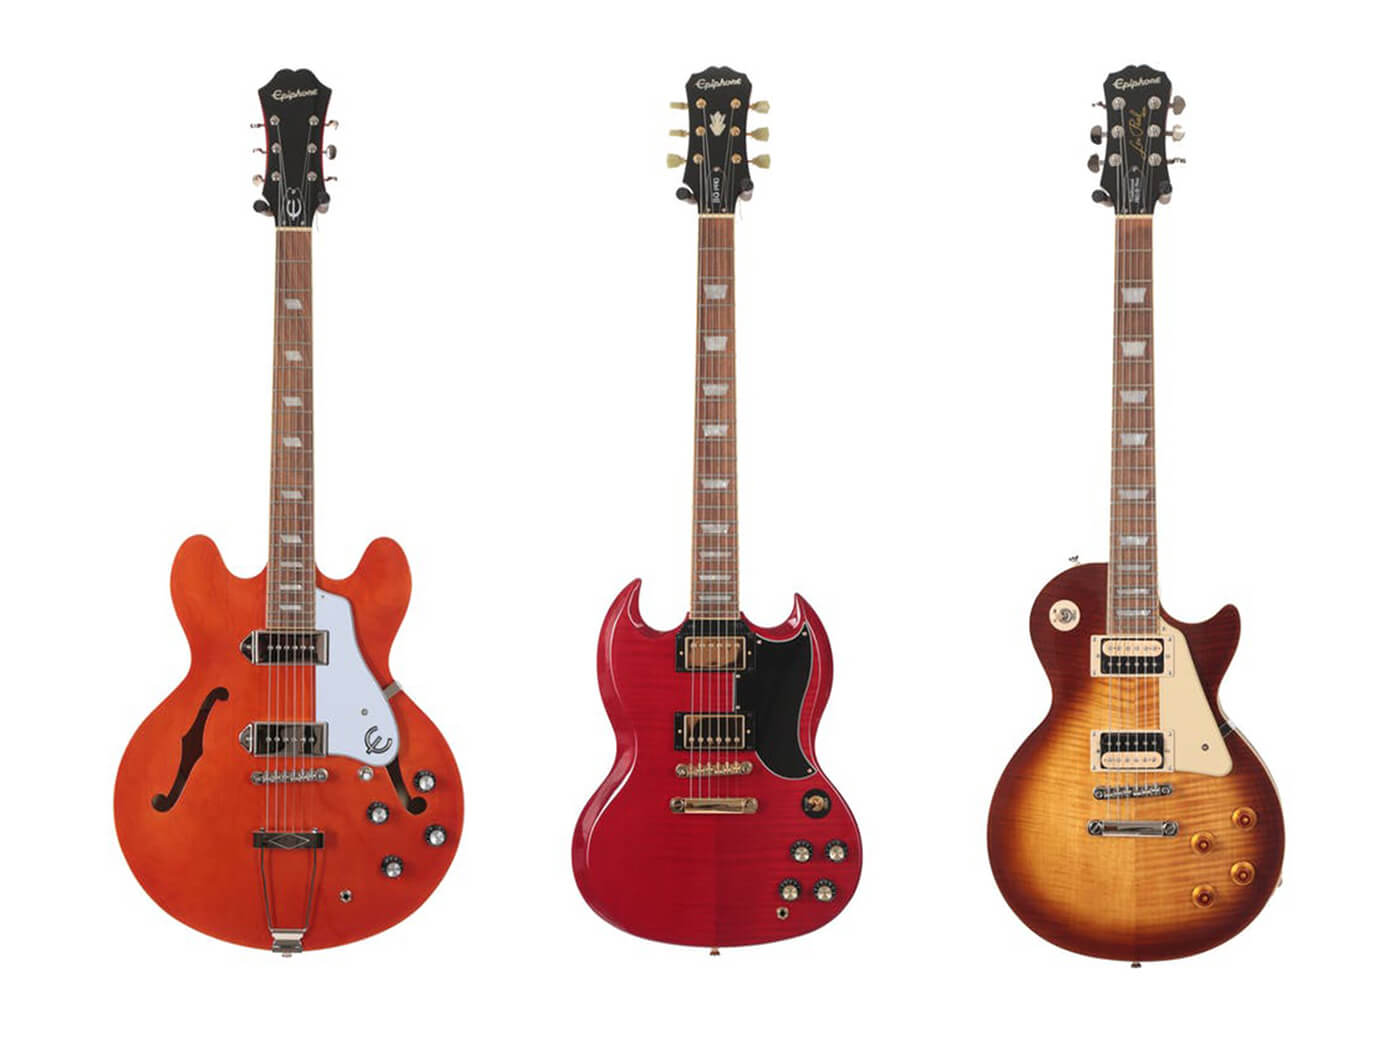 Epiphone Limited-Edition range August 2019